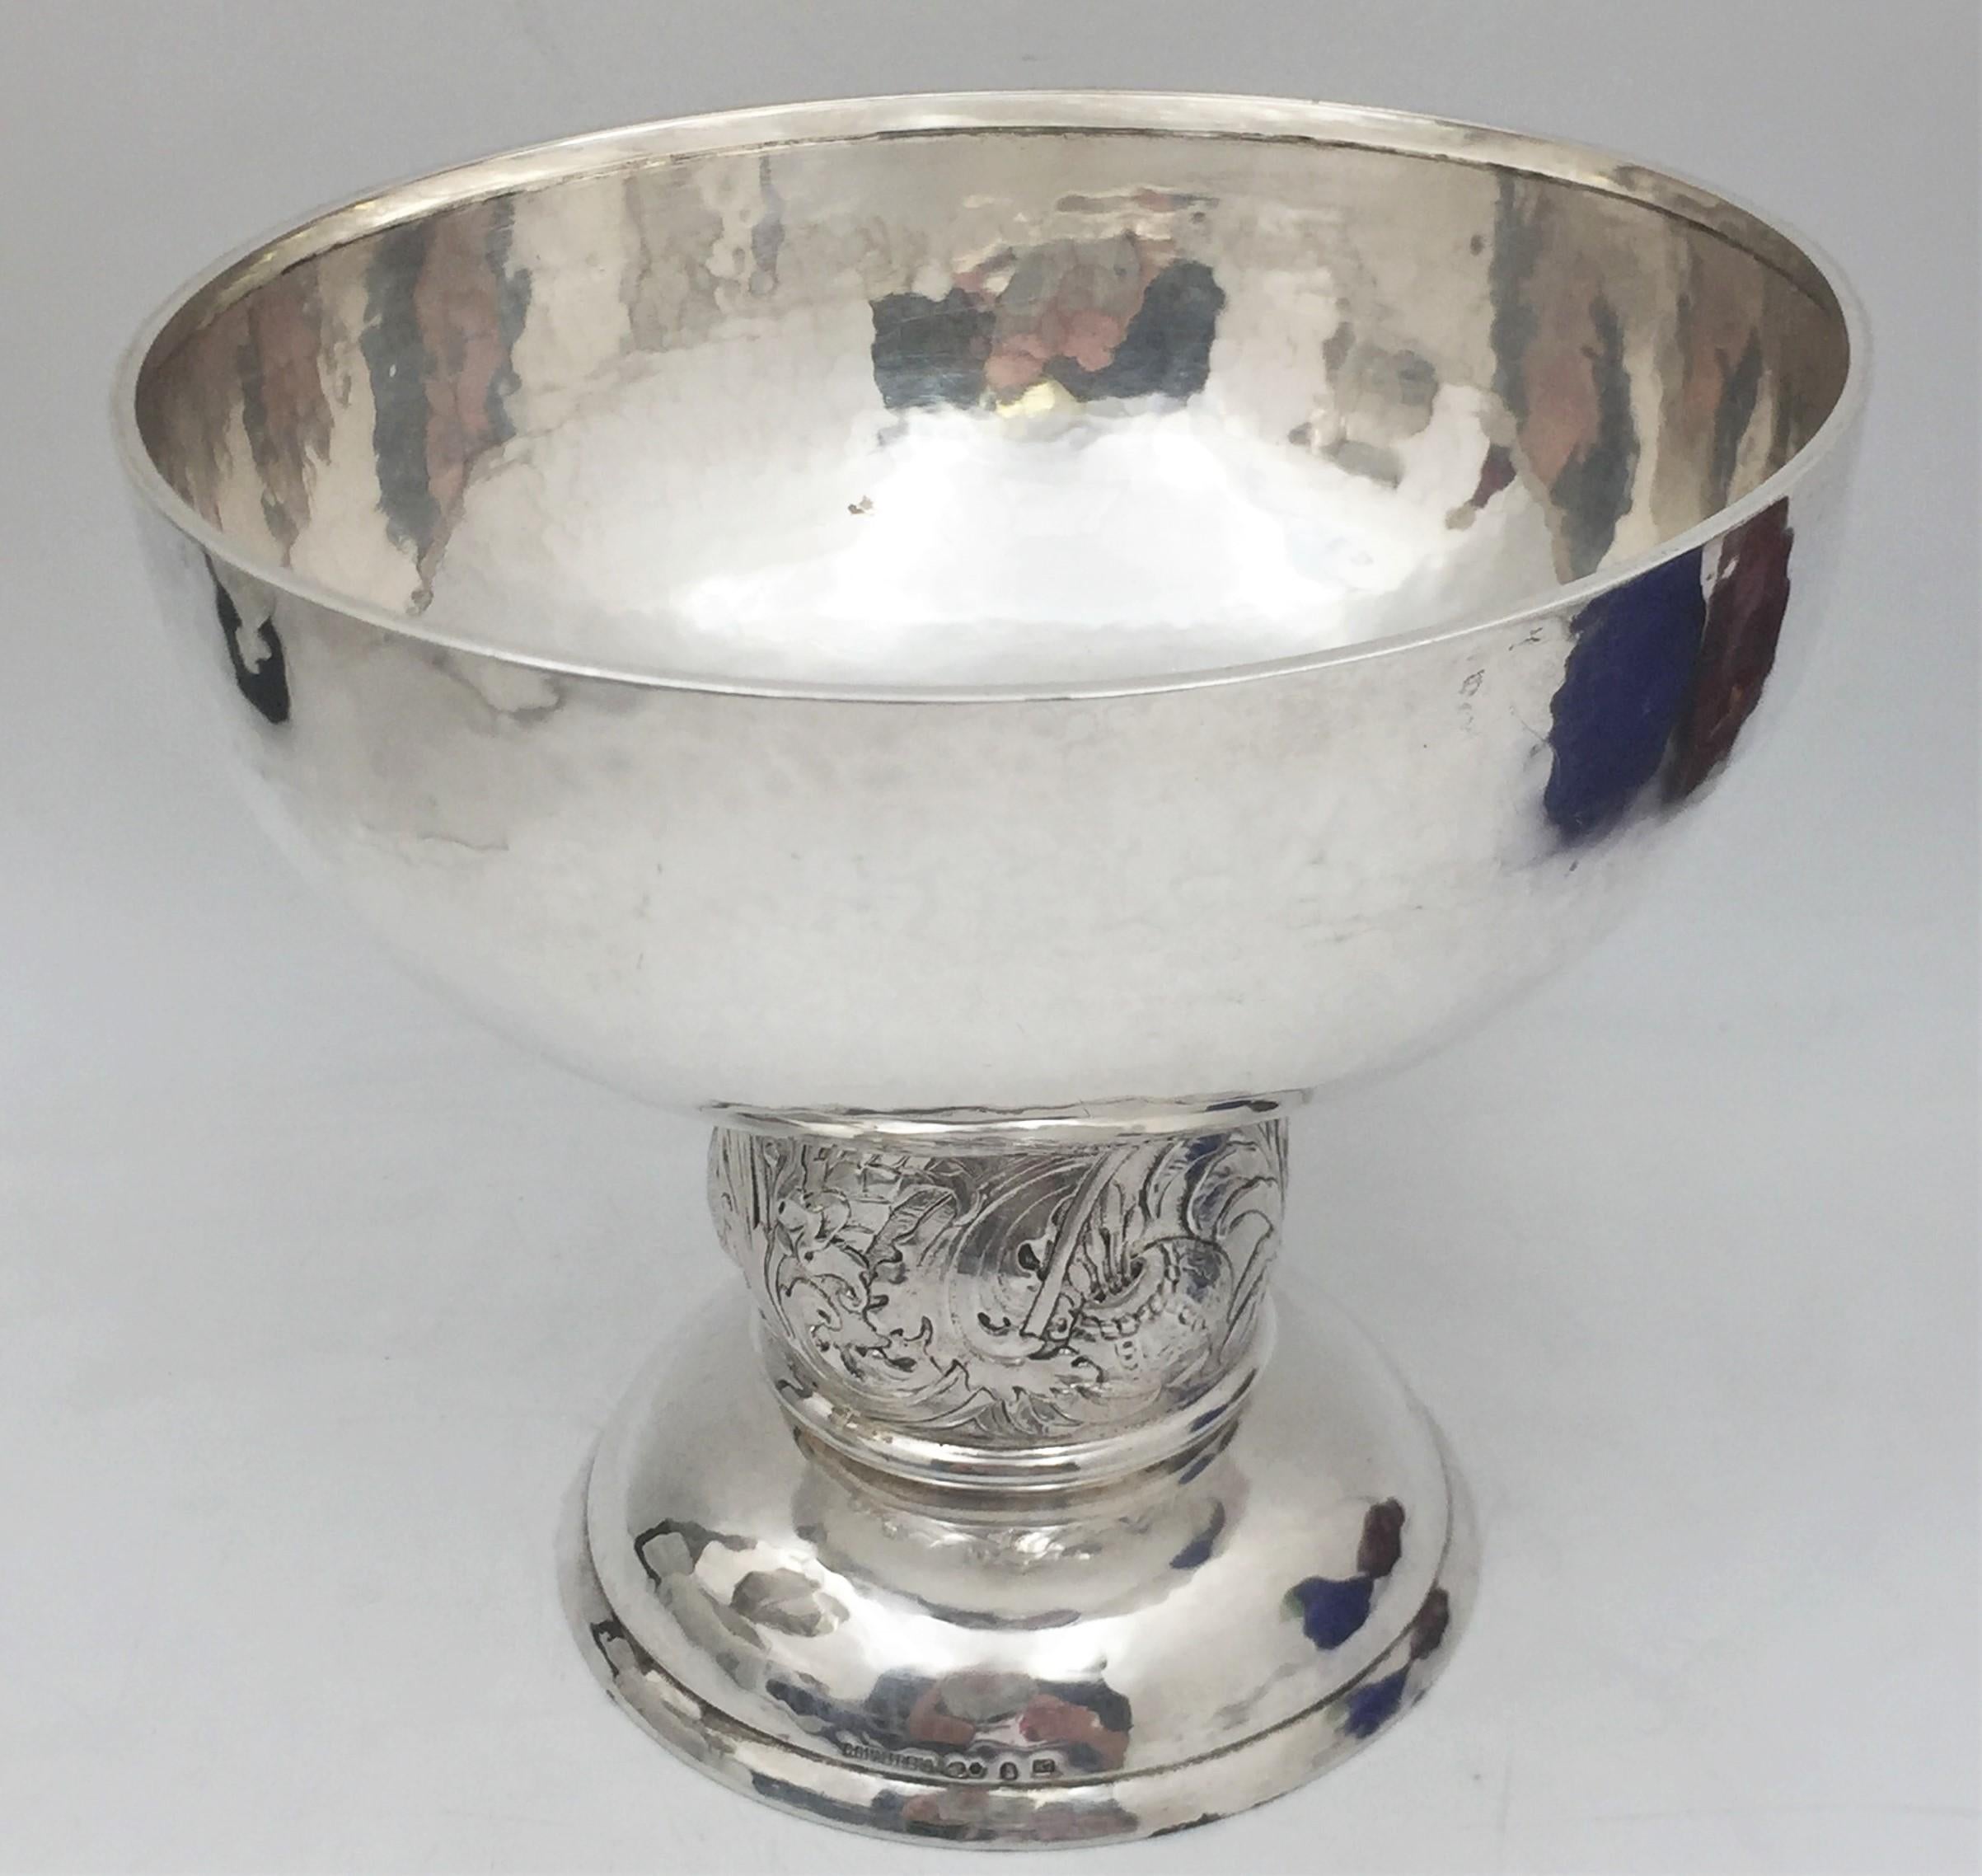 C. G. Hallberg, Swedish silver compote bowl from 1919, beautifully hand hammered and in Art Nouveau style with curvilinear, natural motifs in relief adorning the stem of the compote. It measures 6 1/2'' in height by 7 1/4'' in diameter, weighs 17.2